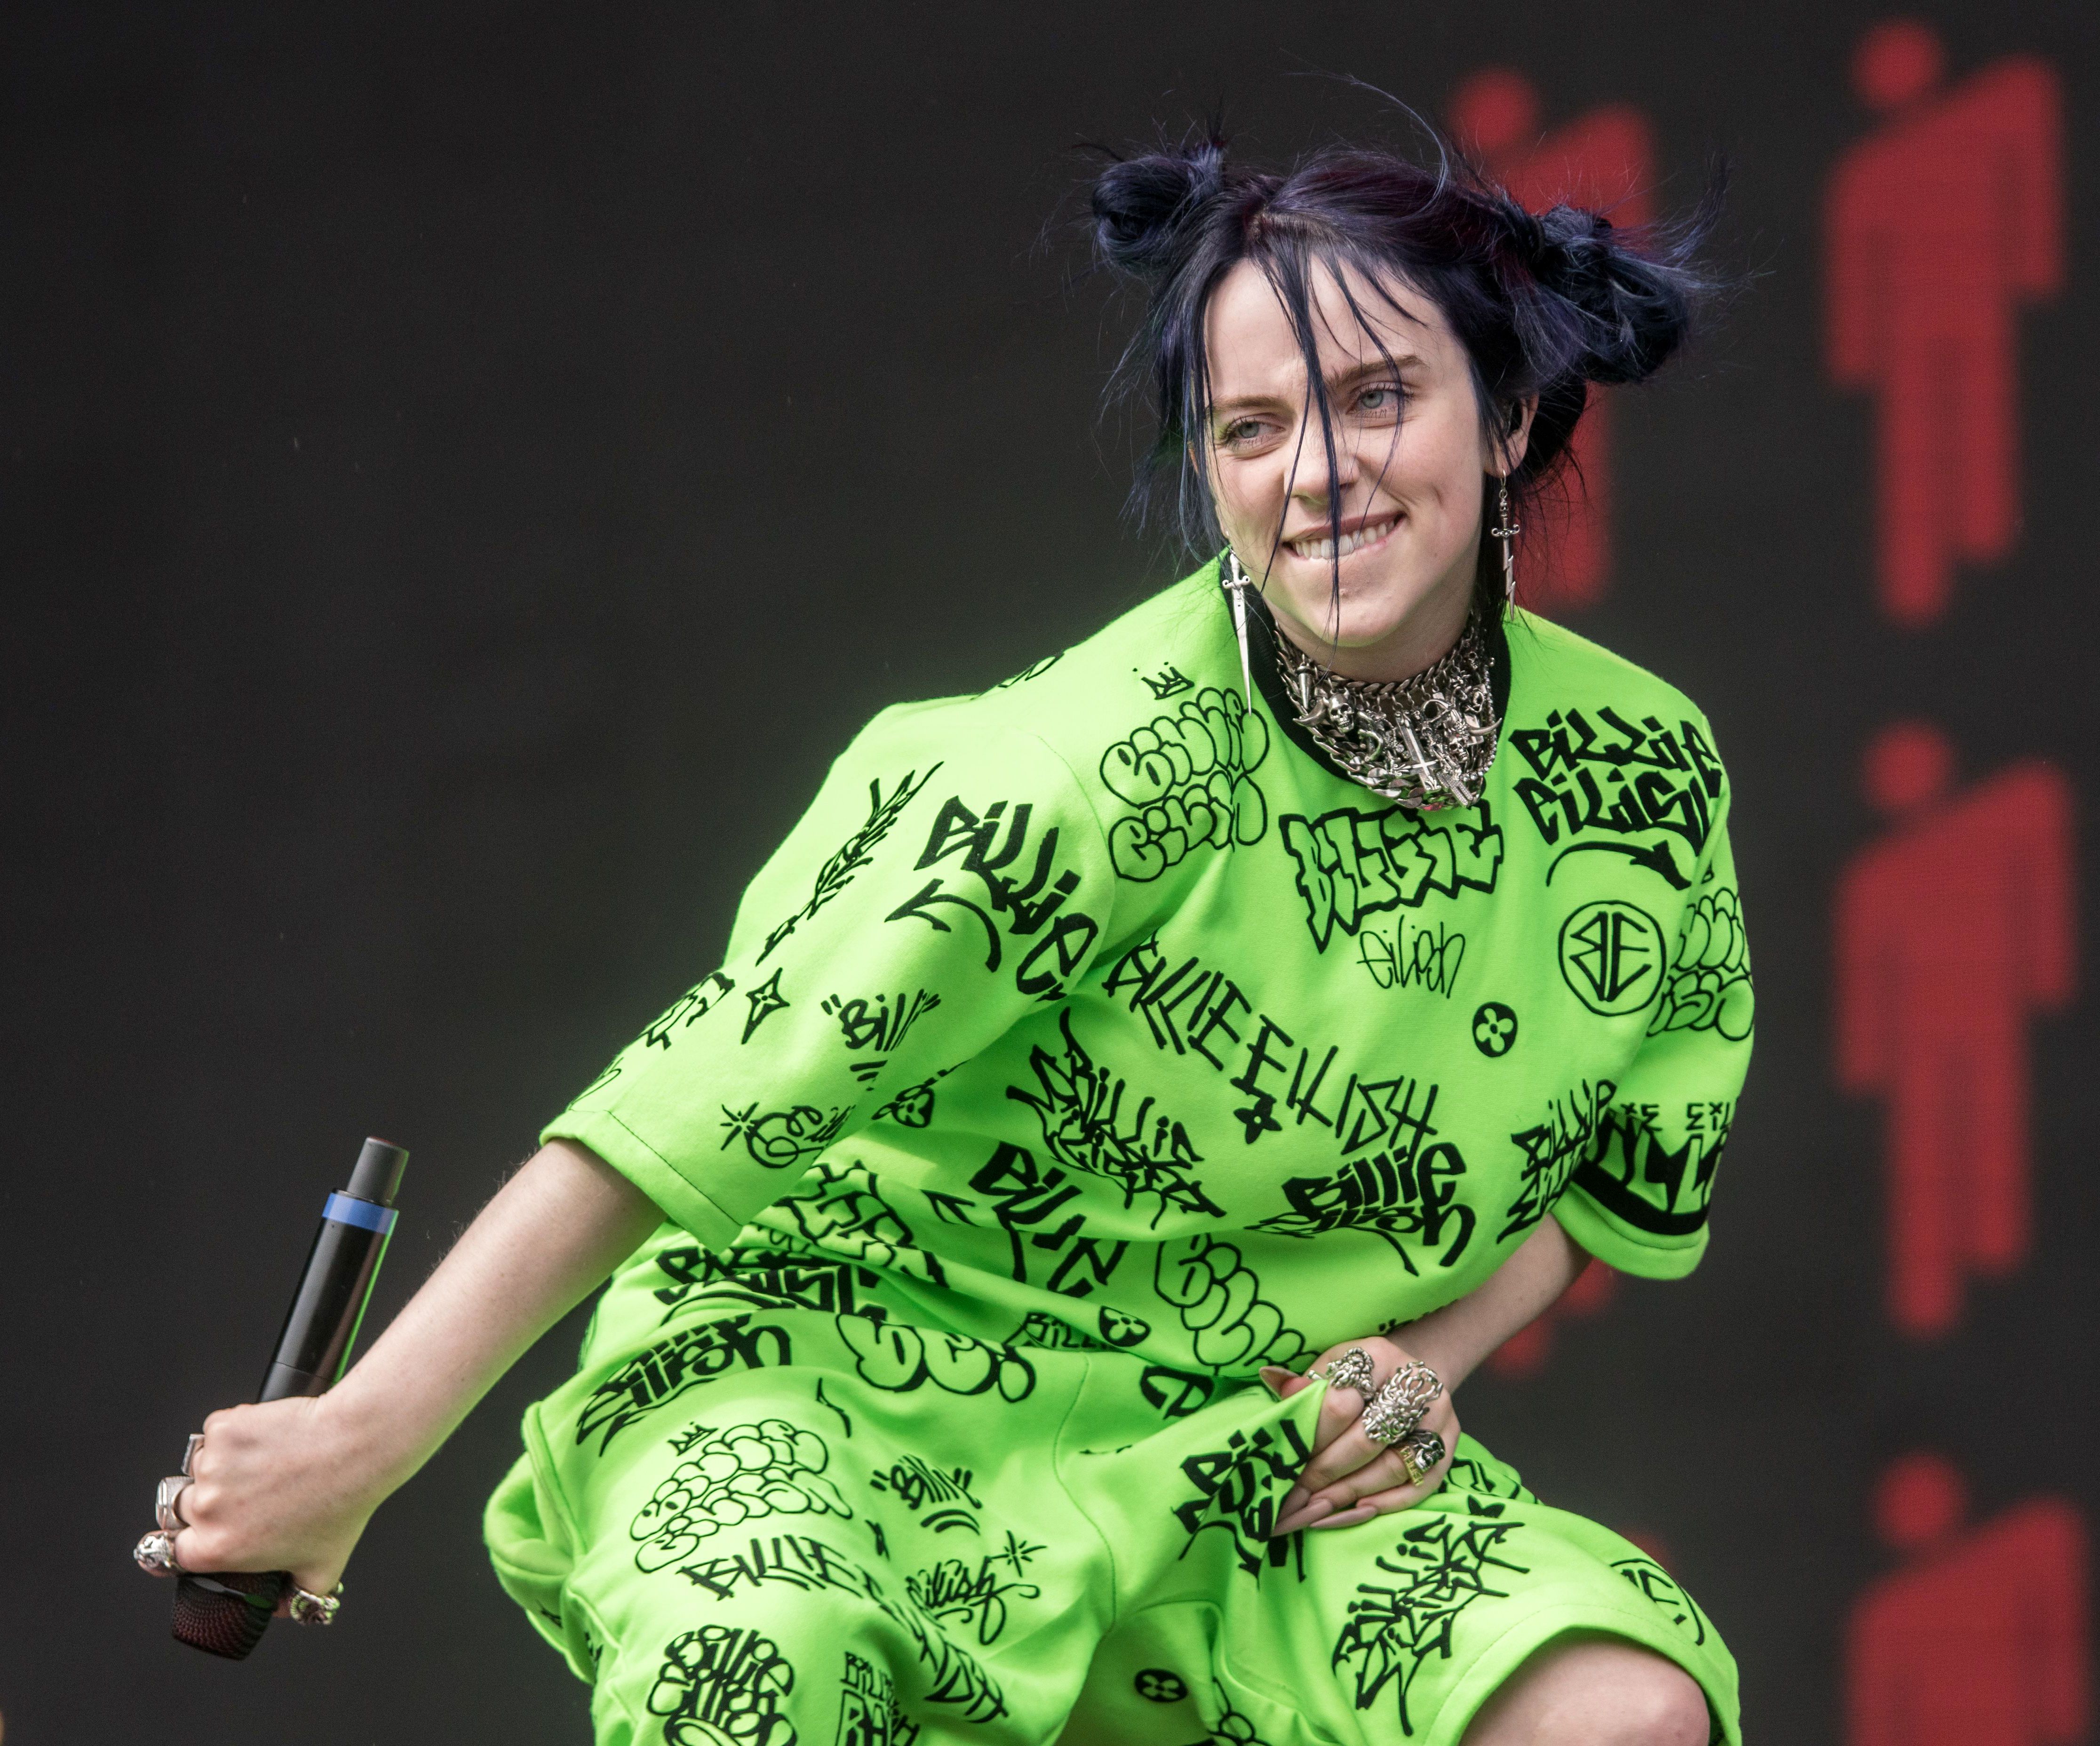 Billie Eilish's blue hair and outfit at the 2020 Grammy Awards - wide 7